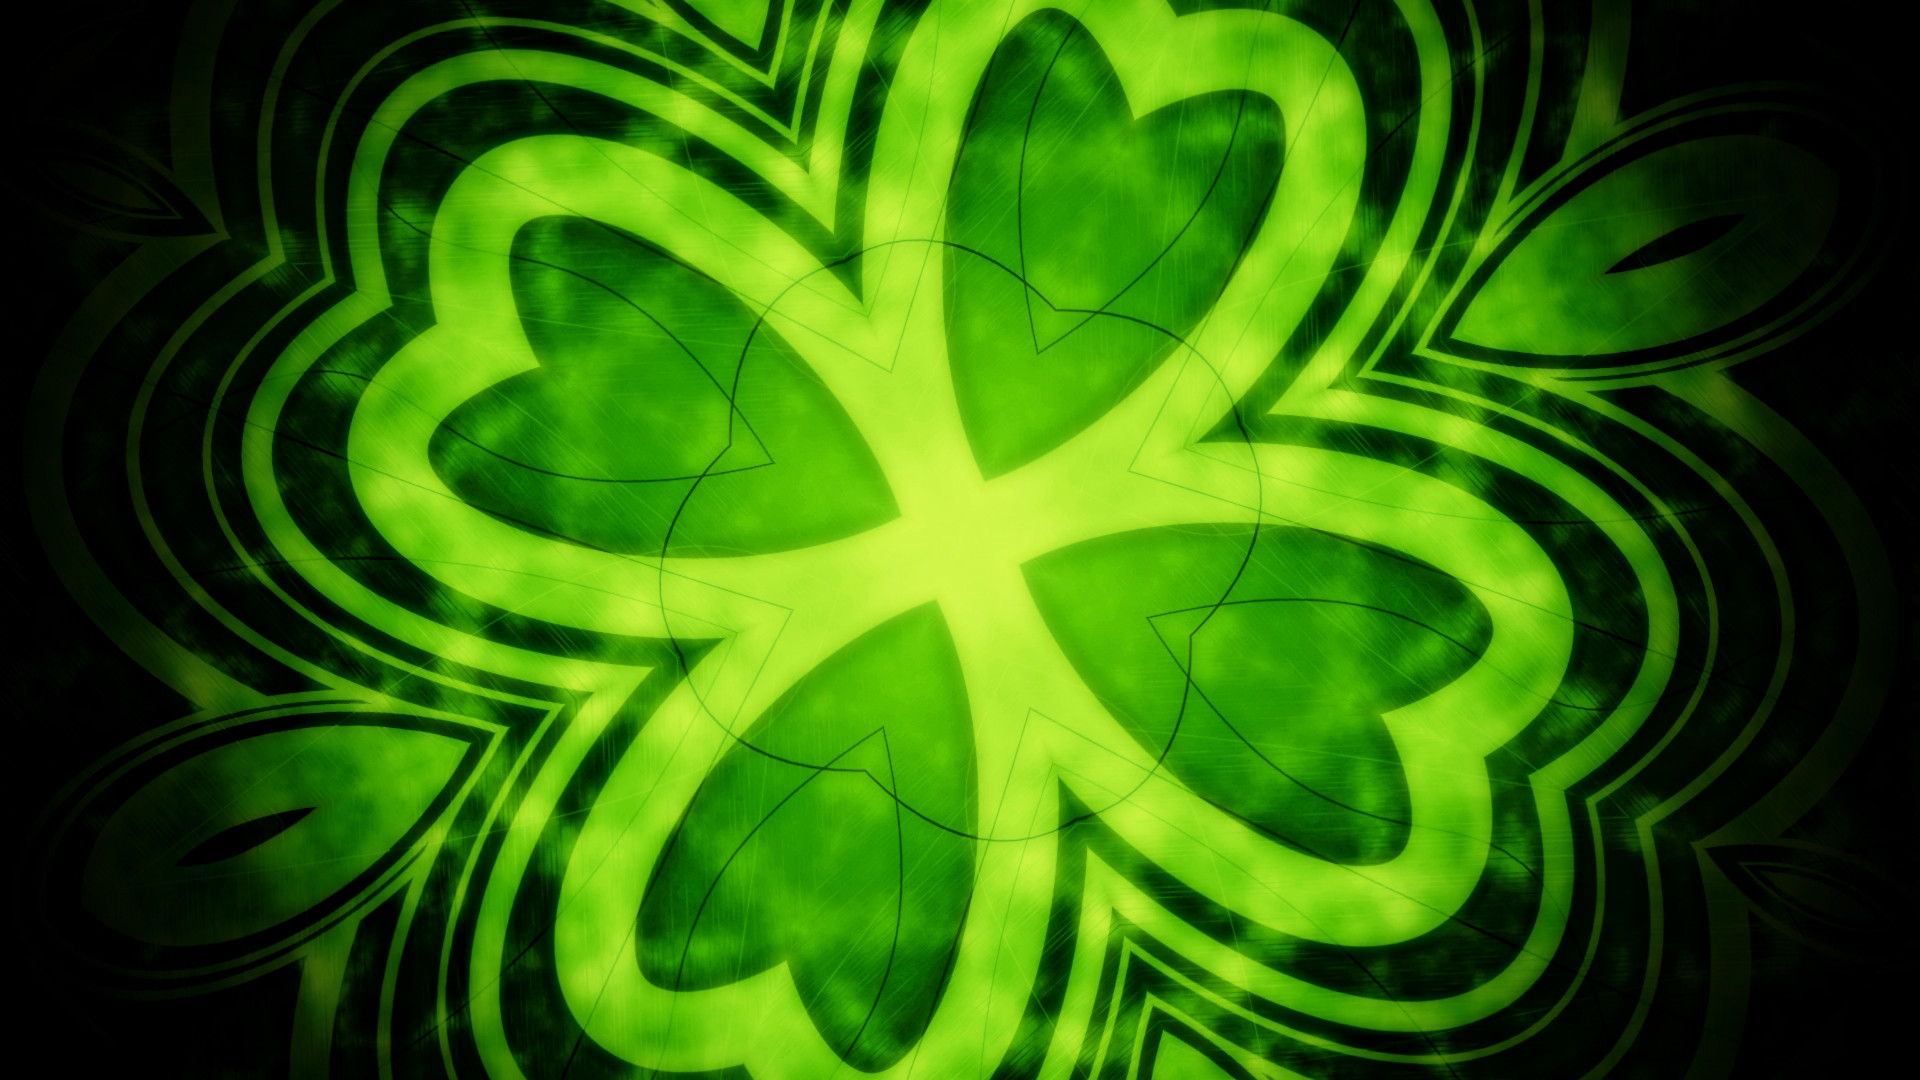 15 lucky Android wallpapers for St. Patricks Day AndroidGuys Celtic ShamrockLeaf ImagesDesktop